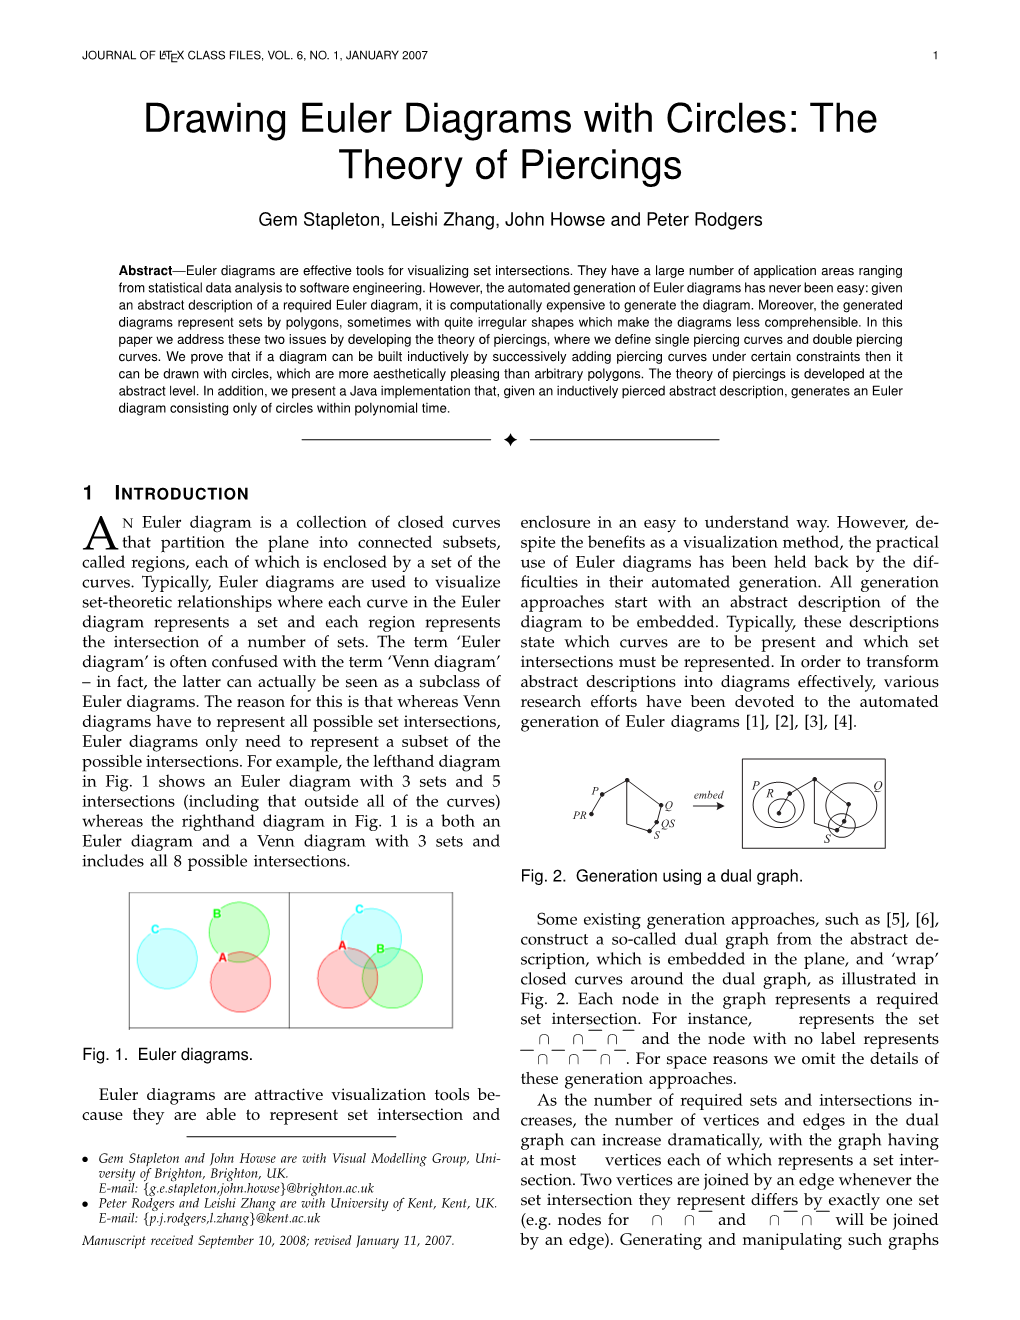 Drawing Euler Diagrams with Circles: the Theory of Piercings